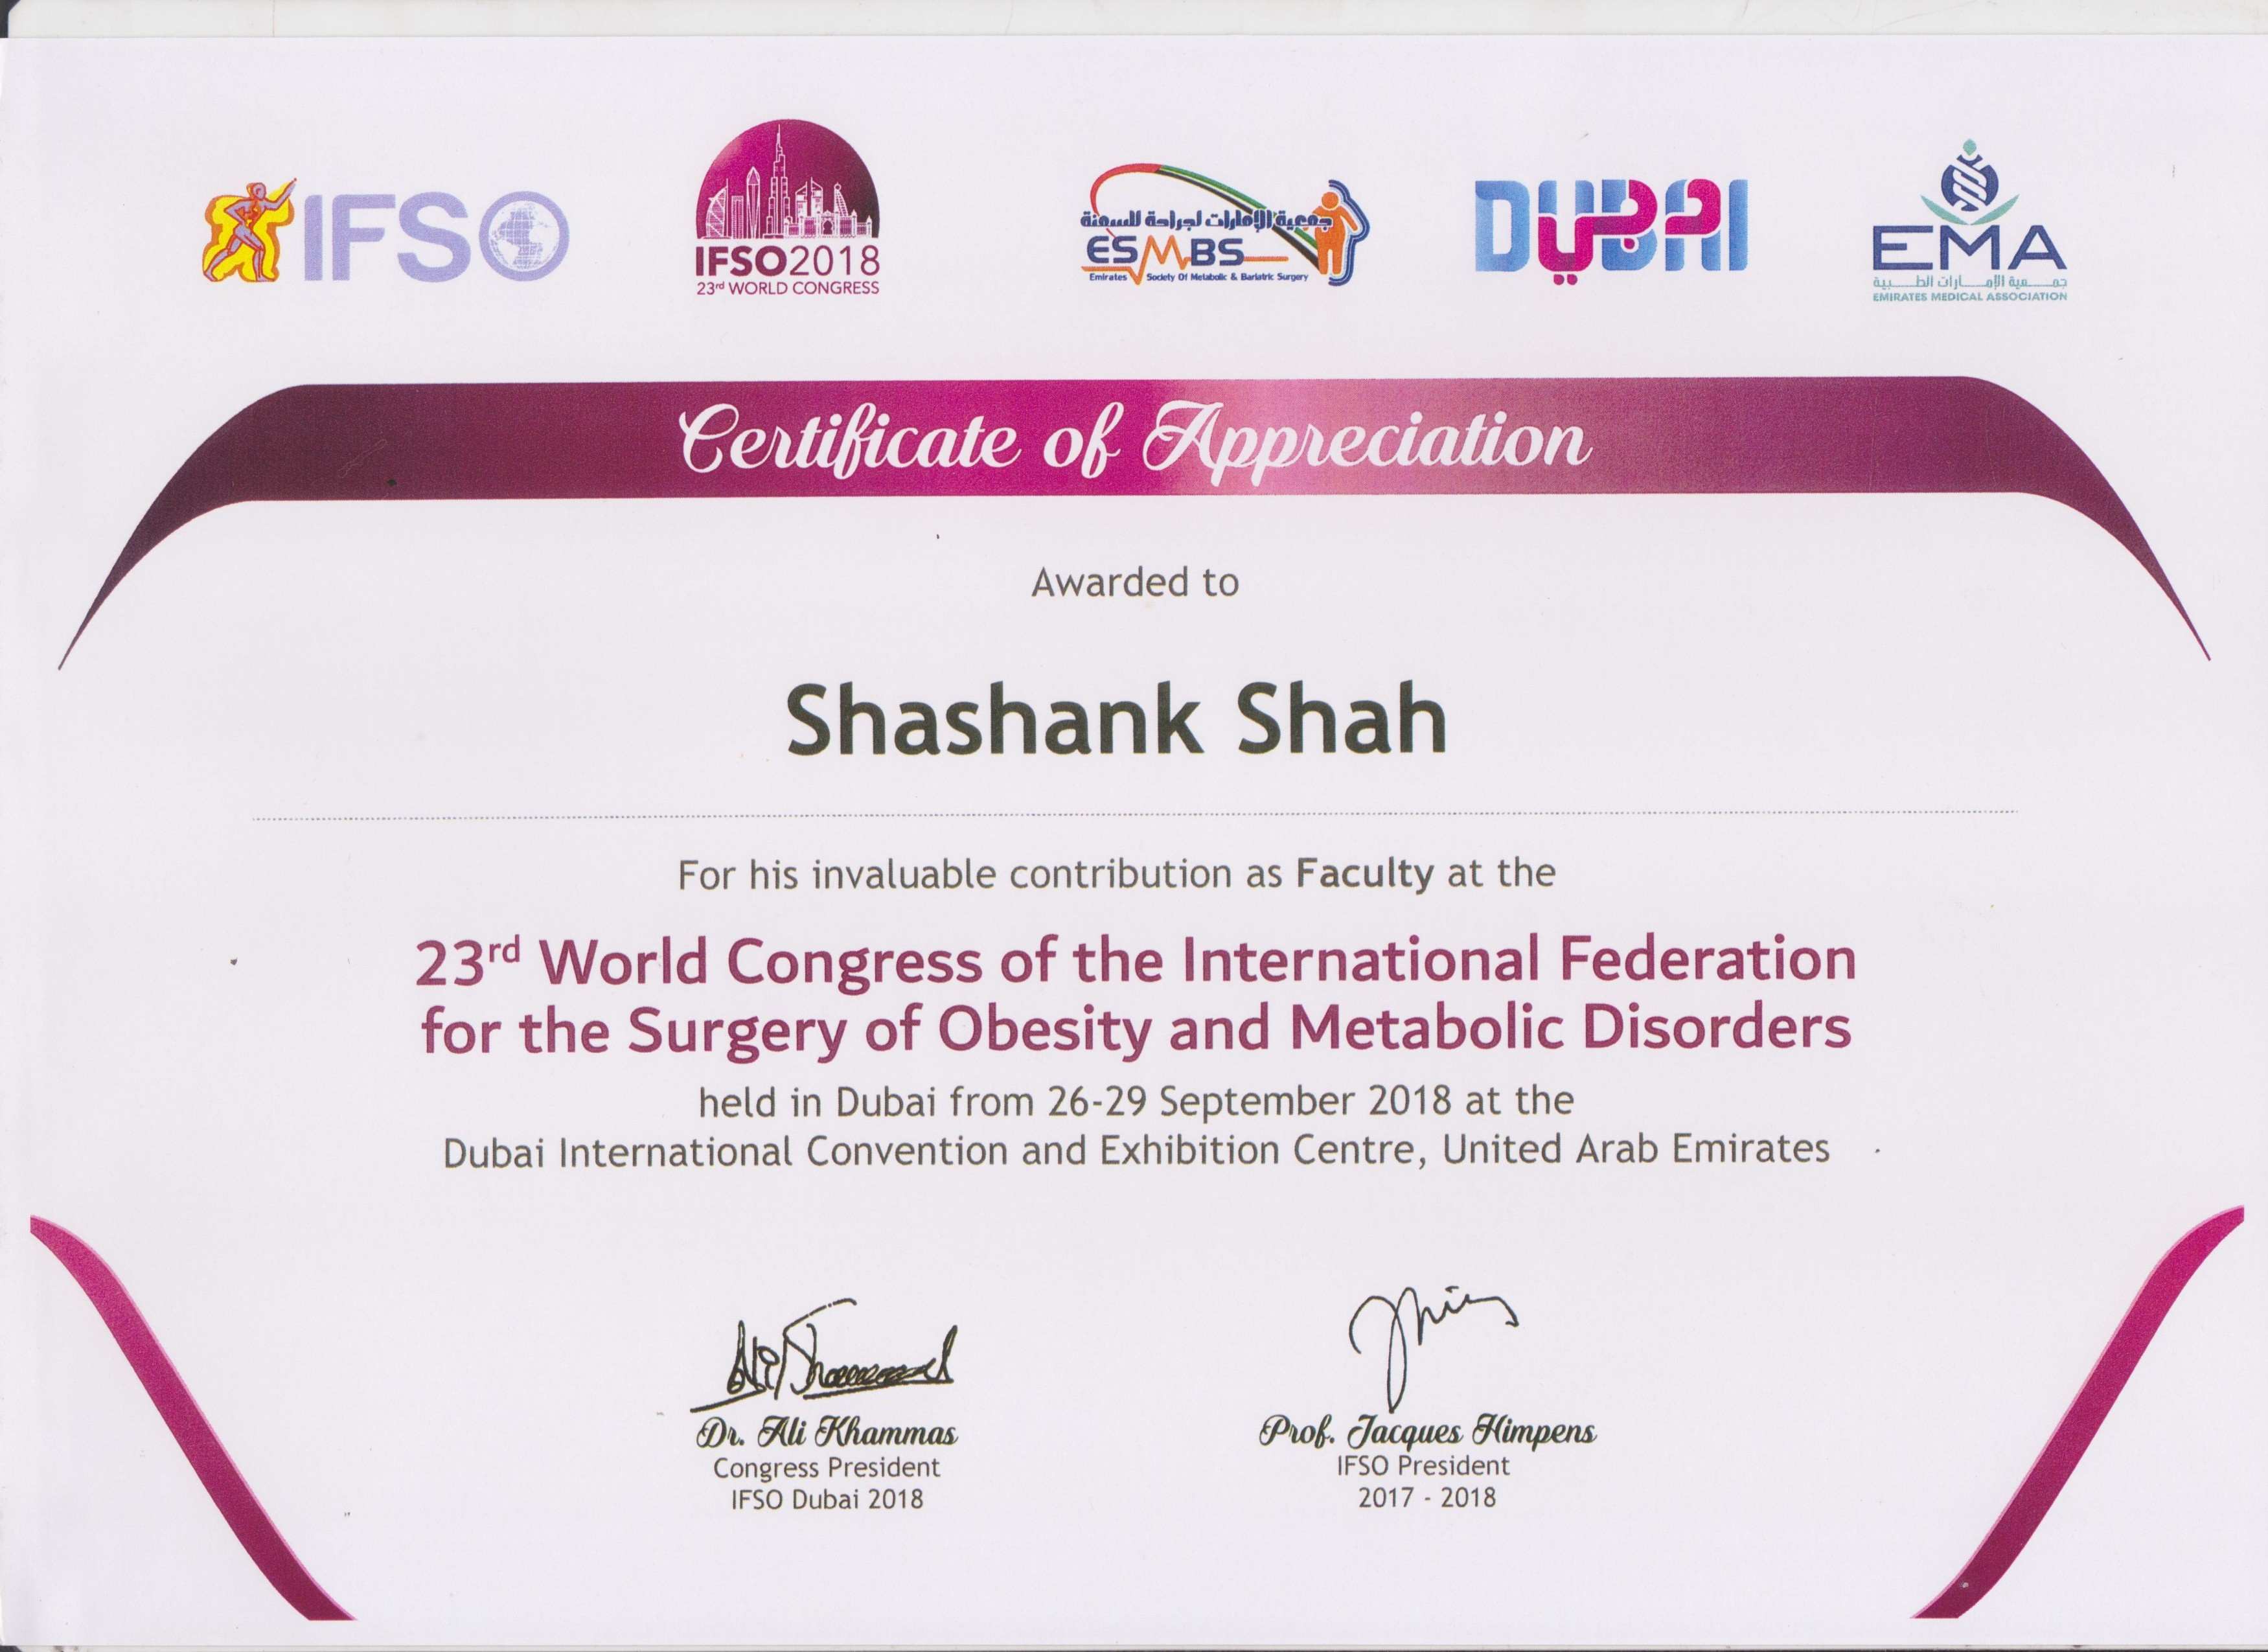 Dr Shashank Shah’s was given the certificate of appreciation for his contribution as a Faculty at the 23rd World Congress of the International Federation of the Surgery for Obesity and Metabolic Disorders (IFSO) held in Dubai in 2018. 